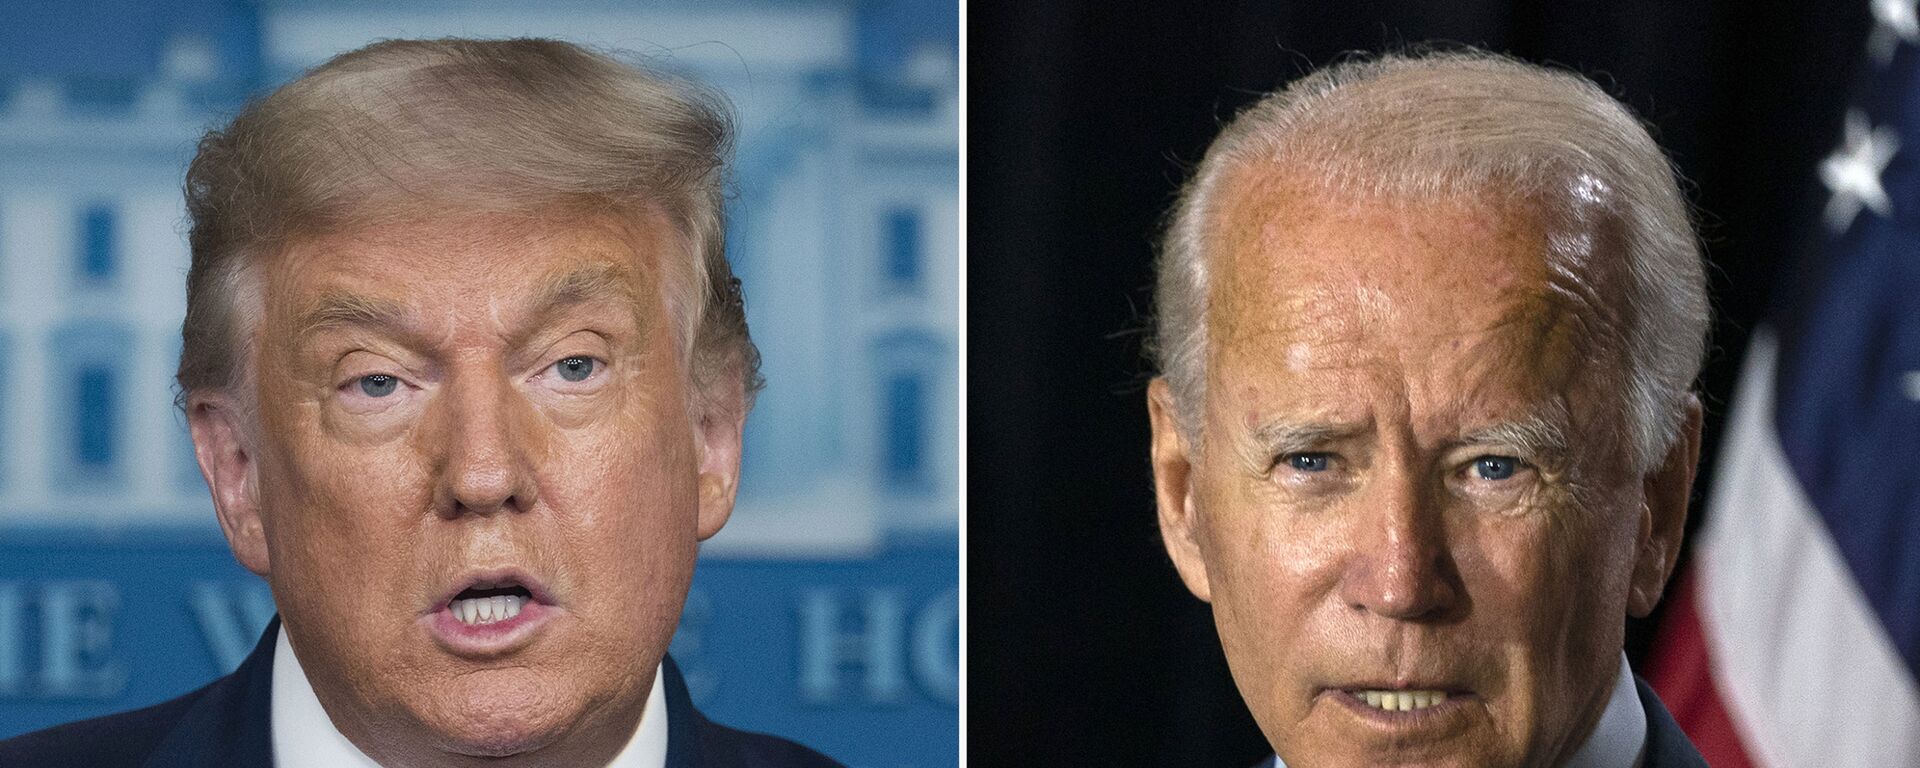 In this combination photo, president Donald Trump, left, speaks at a news conference on Aug. 11, 2020, in Washington and Democratic presidential candidate former Vice President Joe Biden speaks in Wilmington, Del. on Aug. 13, 2020. - Sputnik International, 1920, 16.10.2020